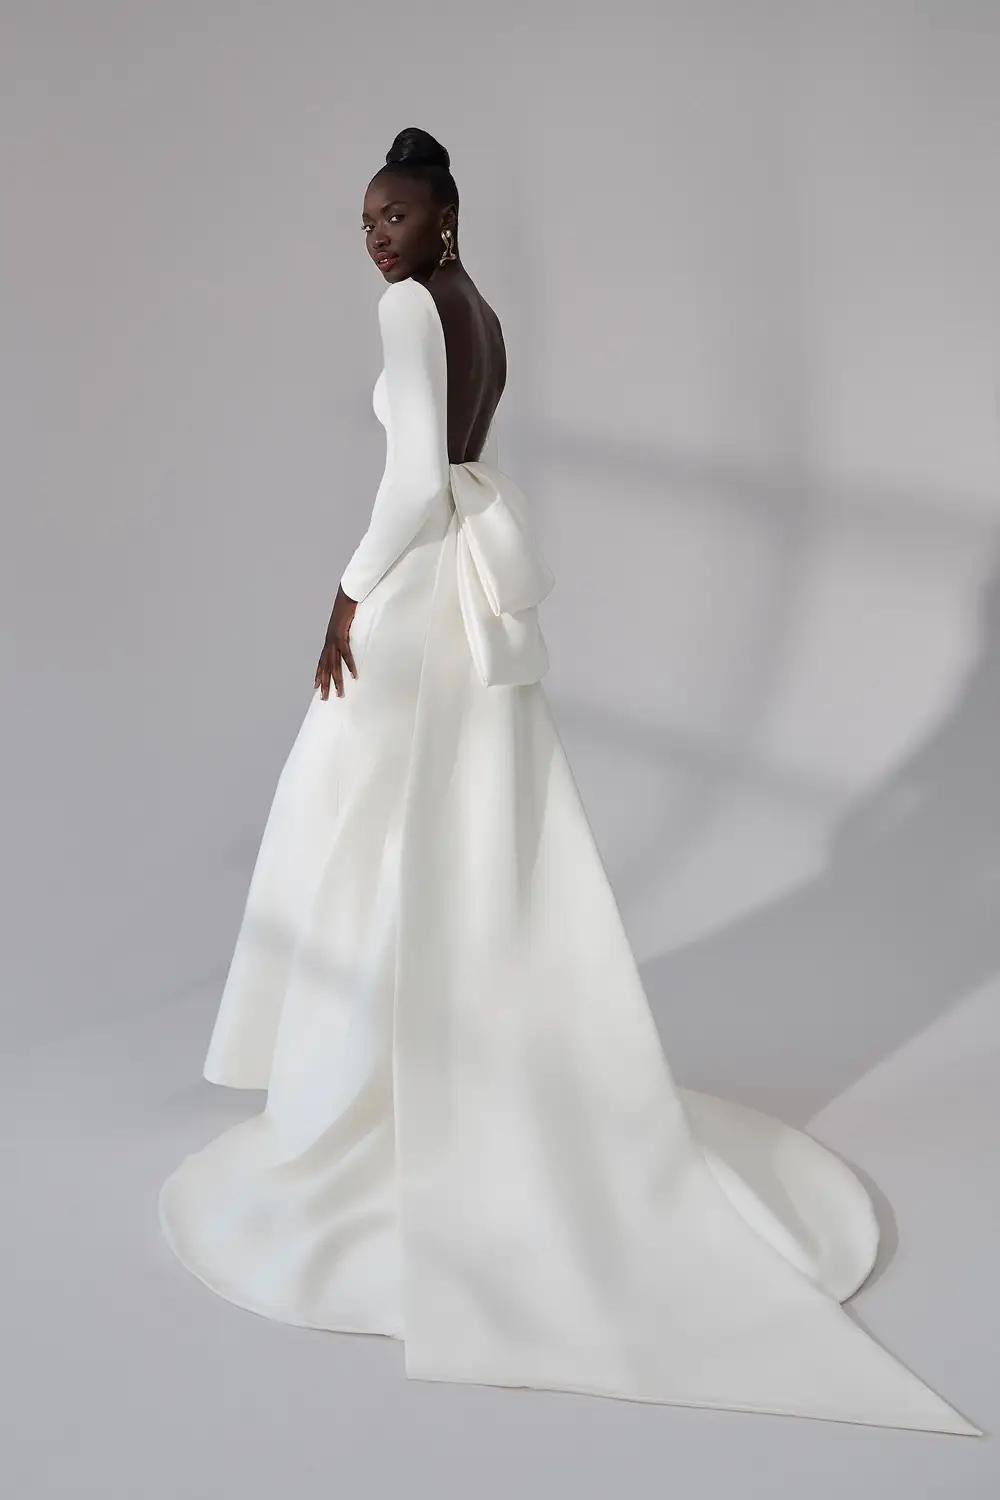 Model wearing a white gown 3